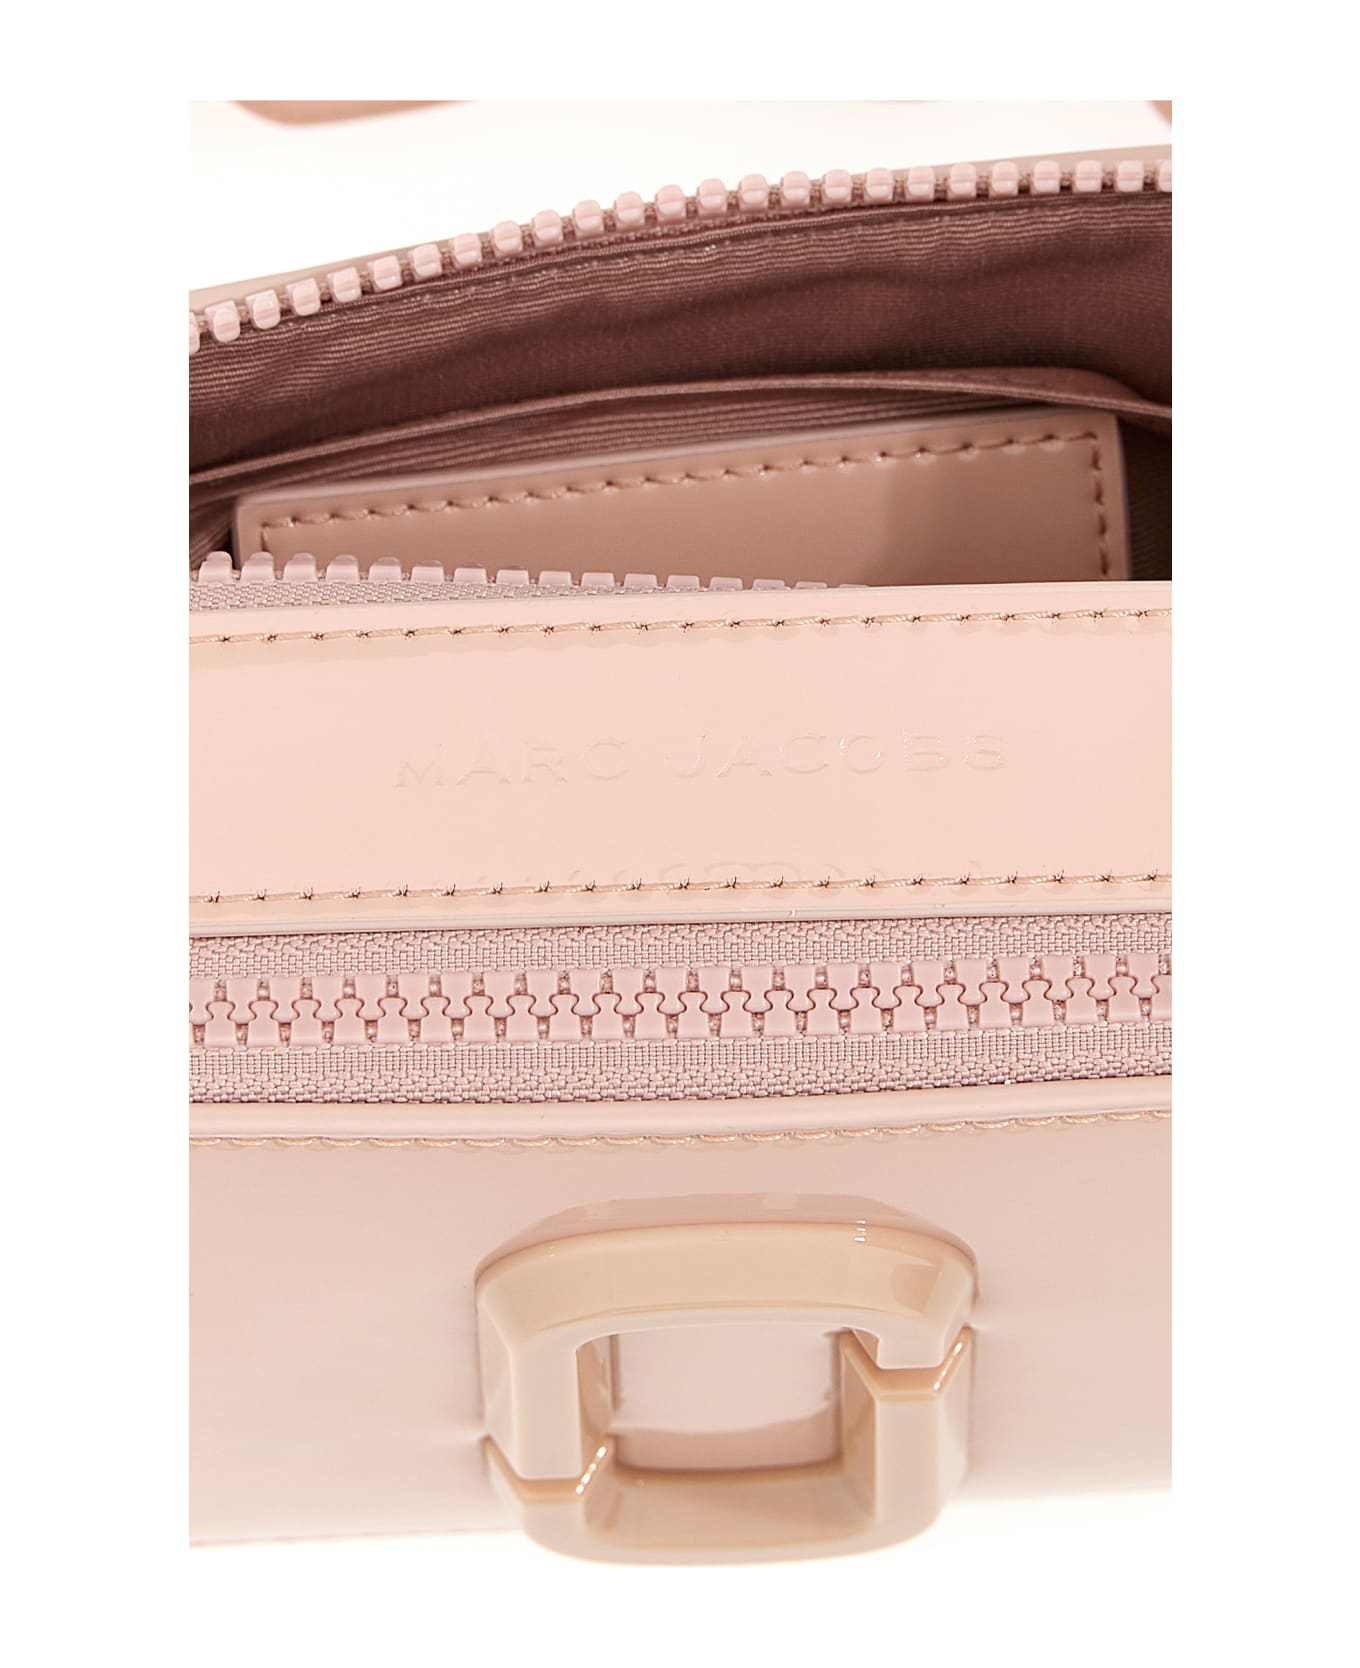 Marc Jacobs The Snapshot Leather Crossbody Bag - Rose ショルダーバッグ